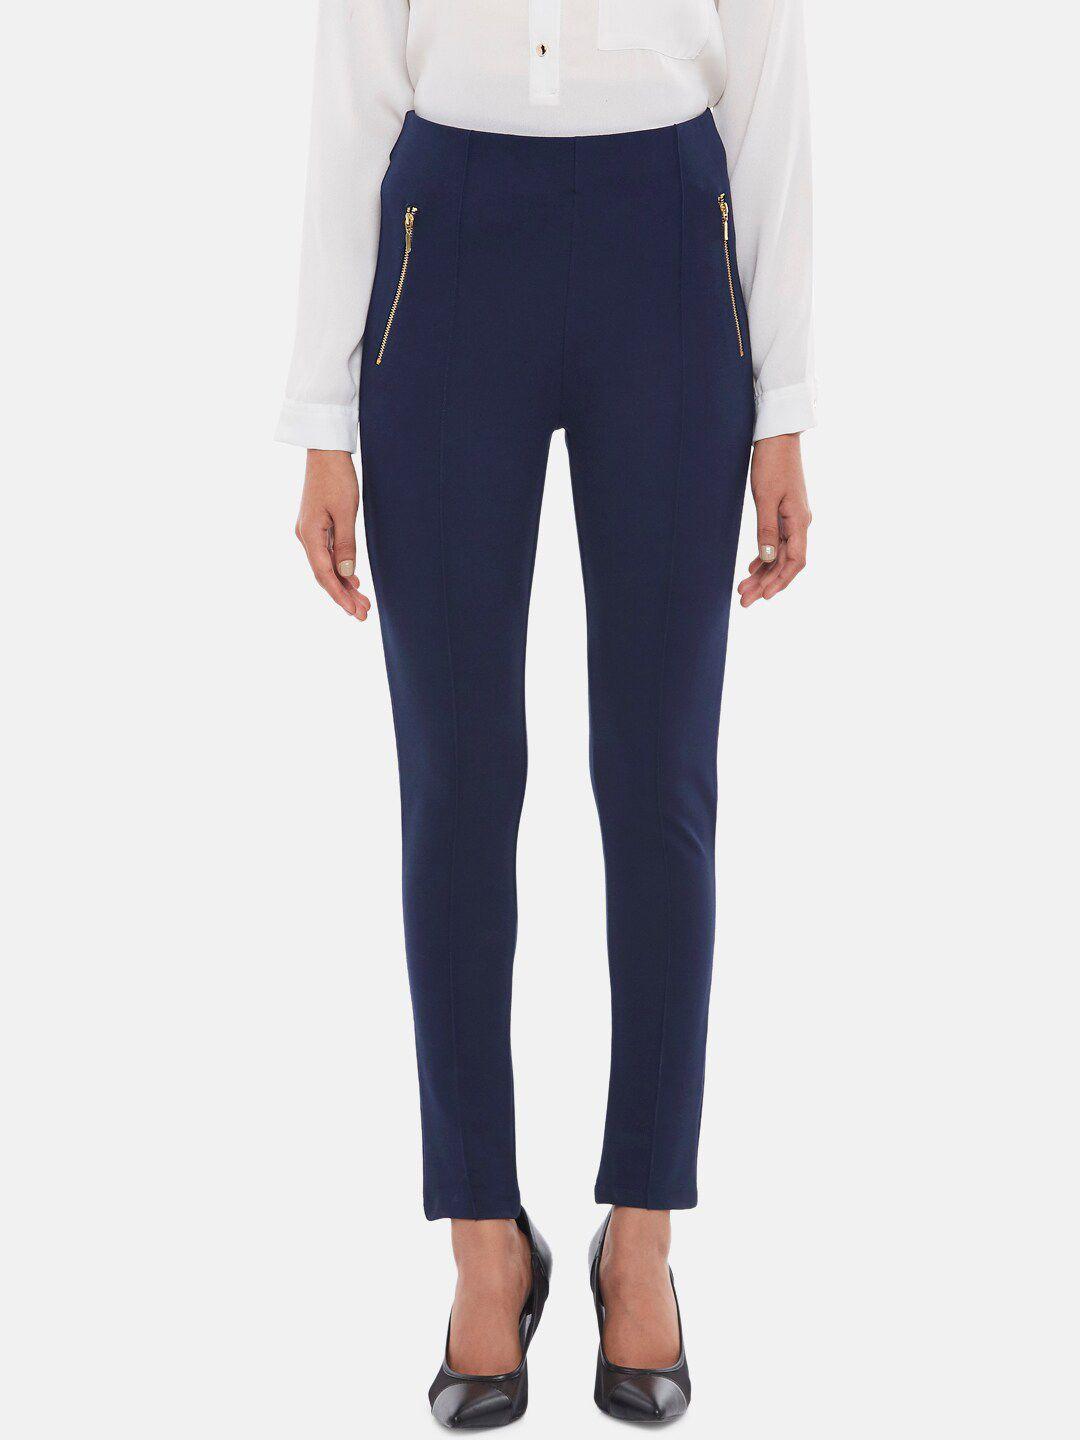 annabelle-by-pantaloons-women-navy-blue-solid-skinny-fit-treggings